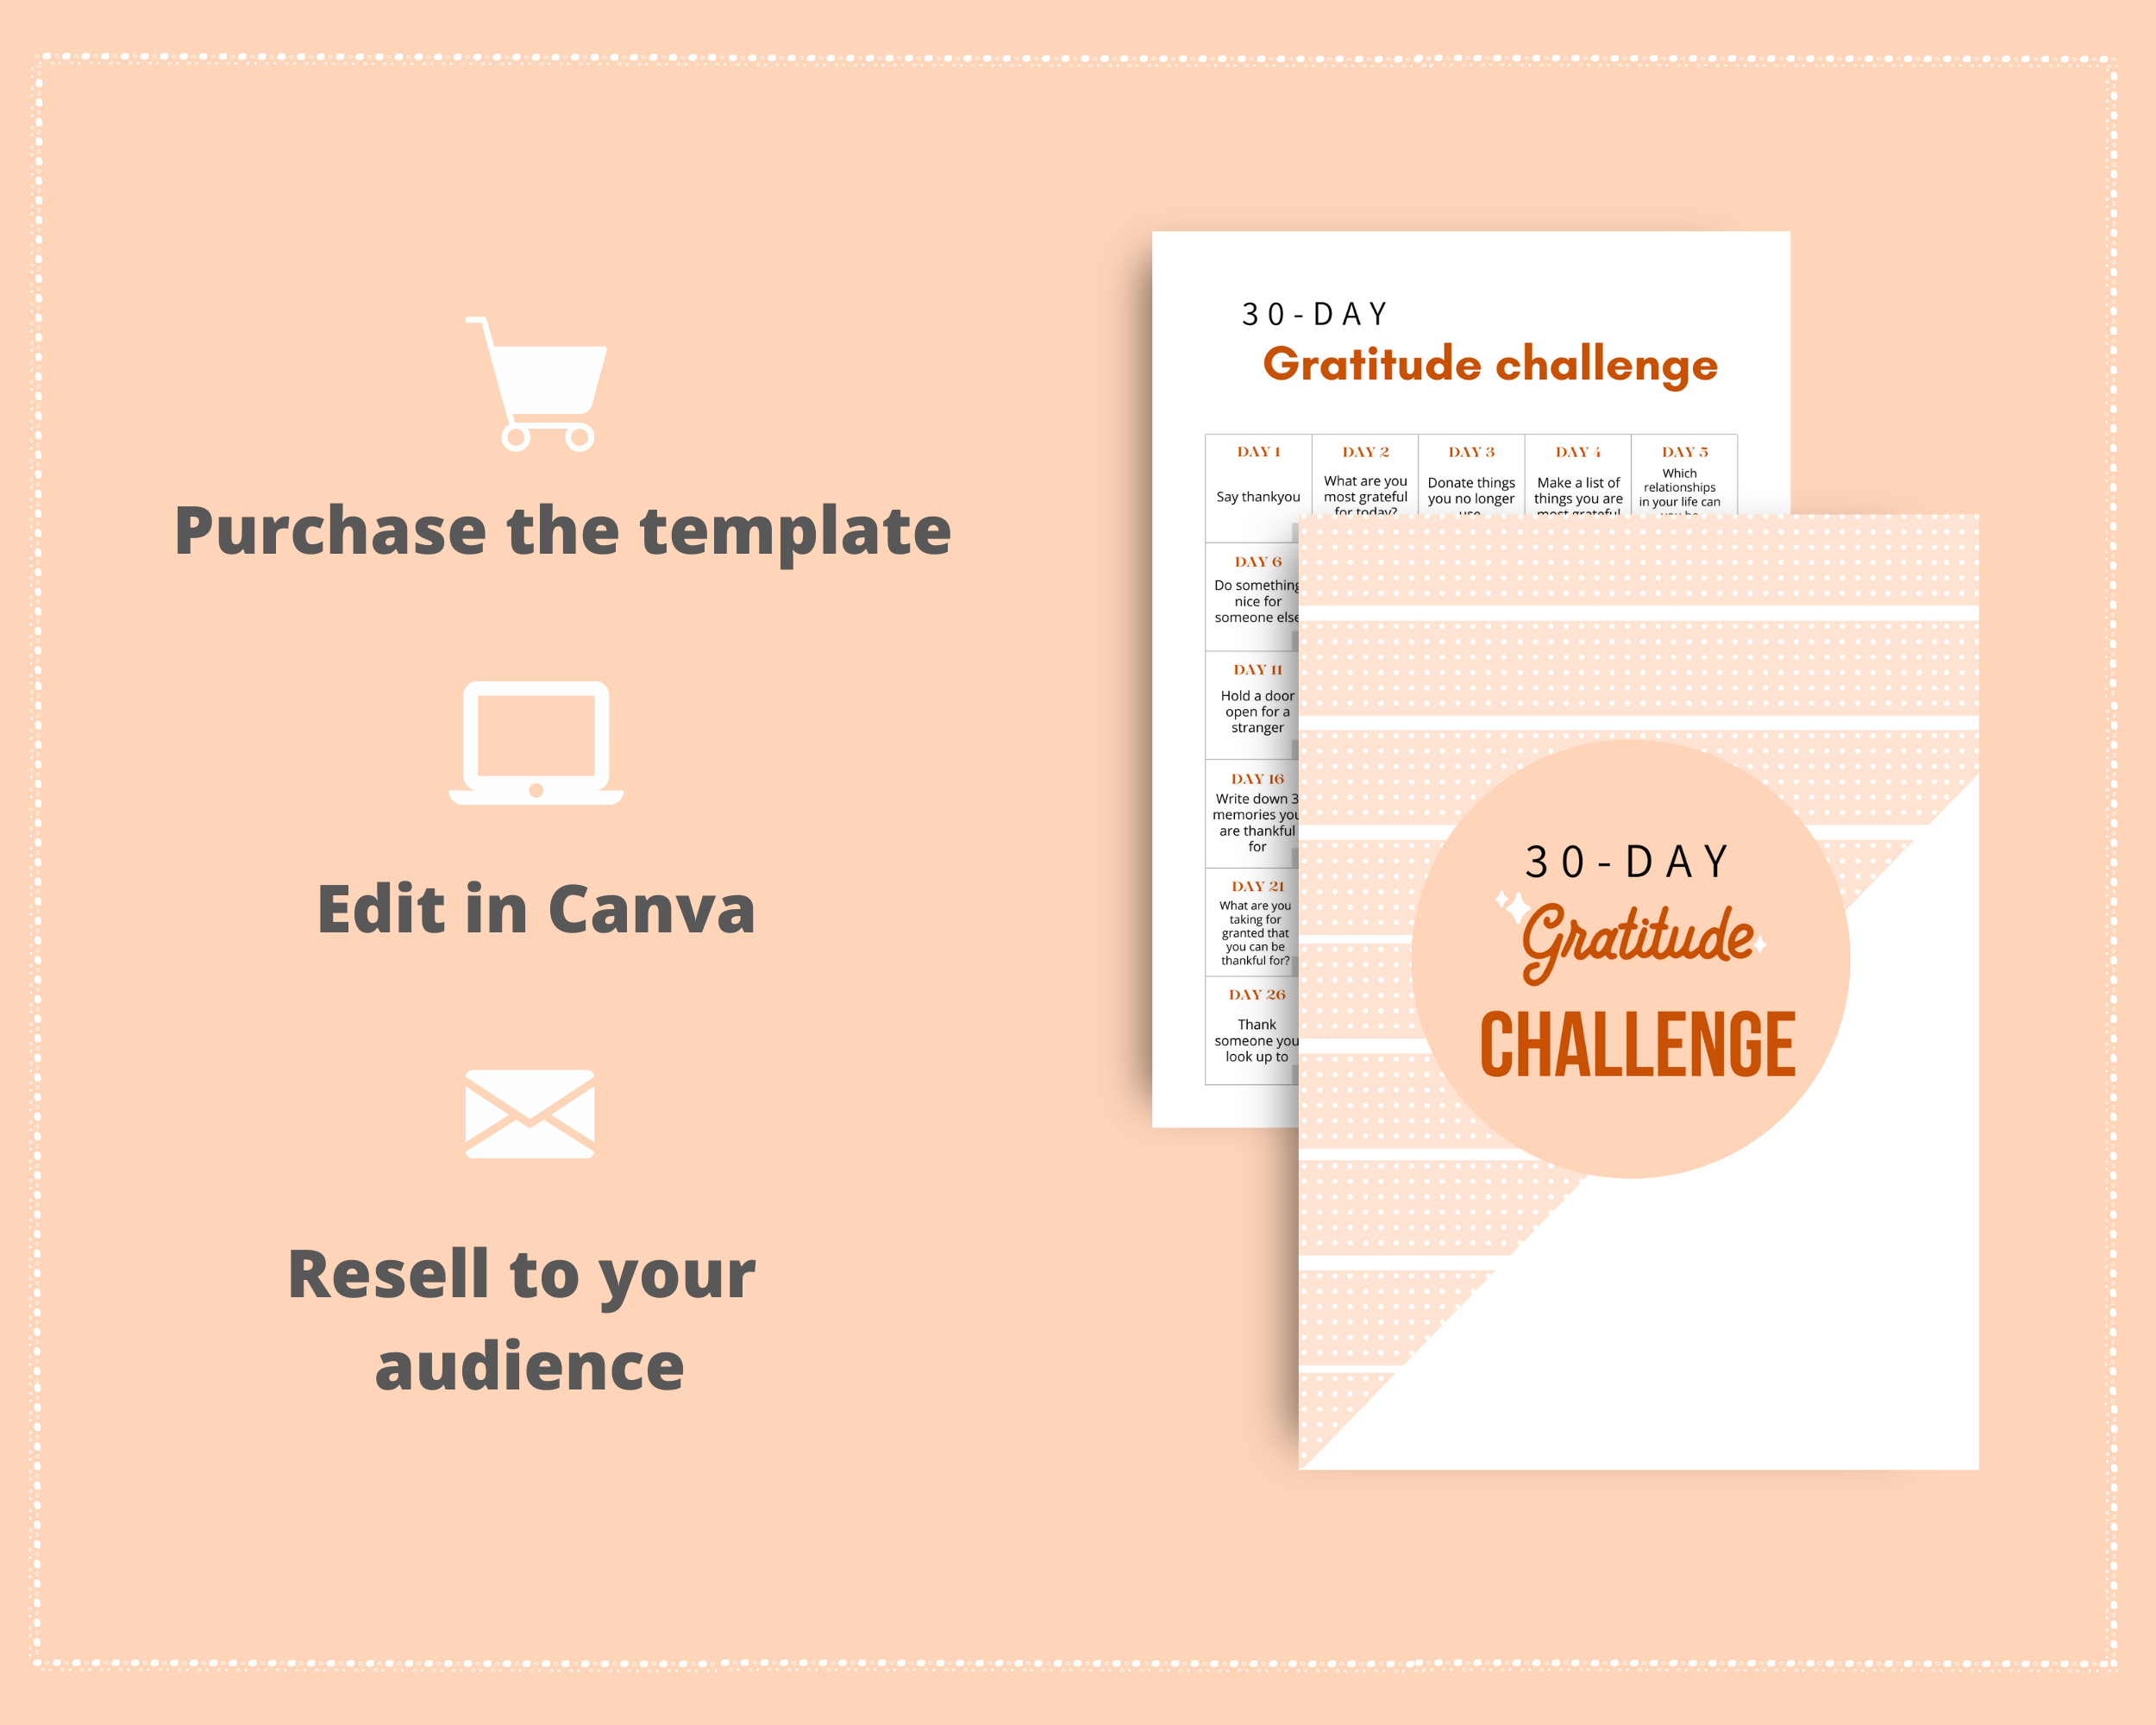 30-Day Gratitude Challenge | Editable Canva Template A4 Size